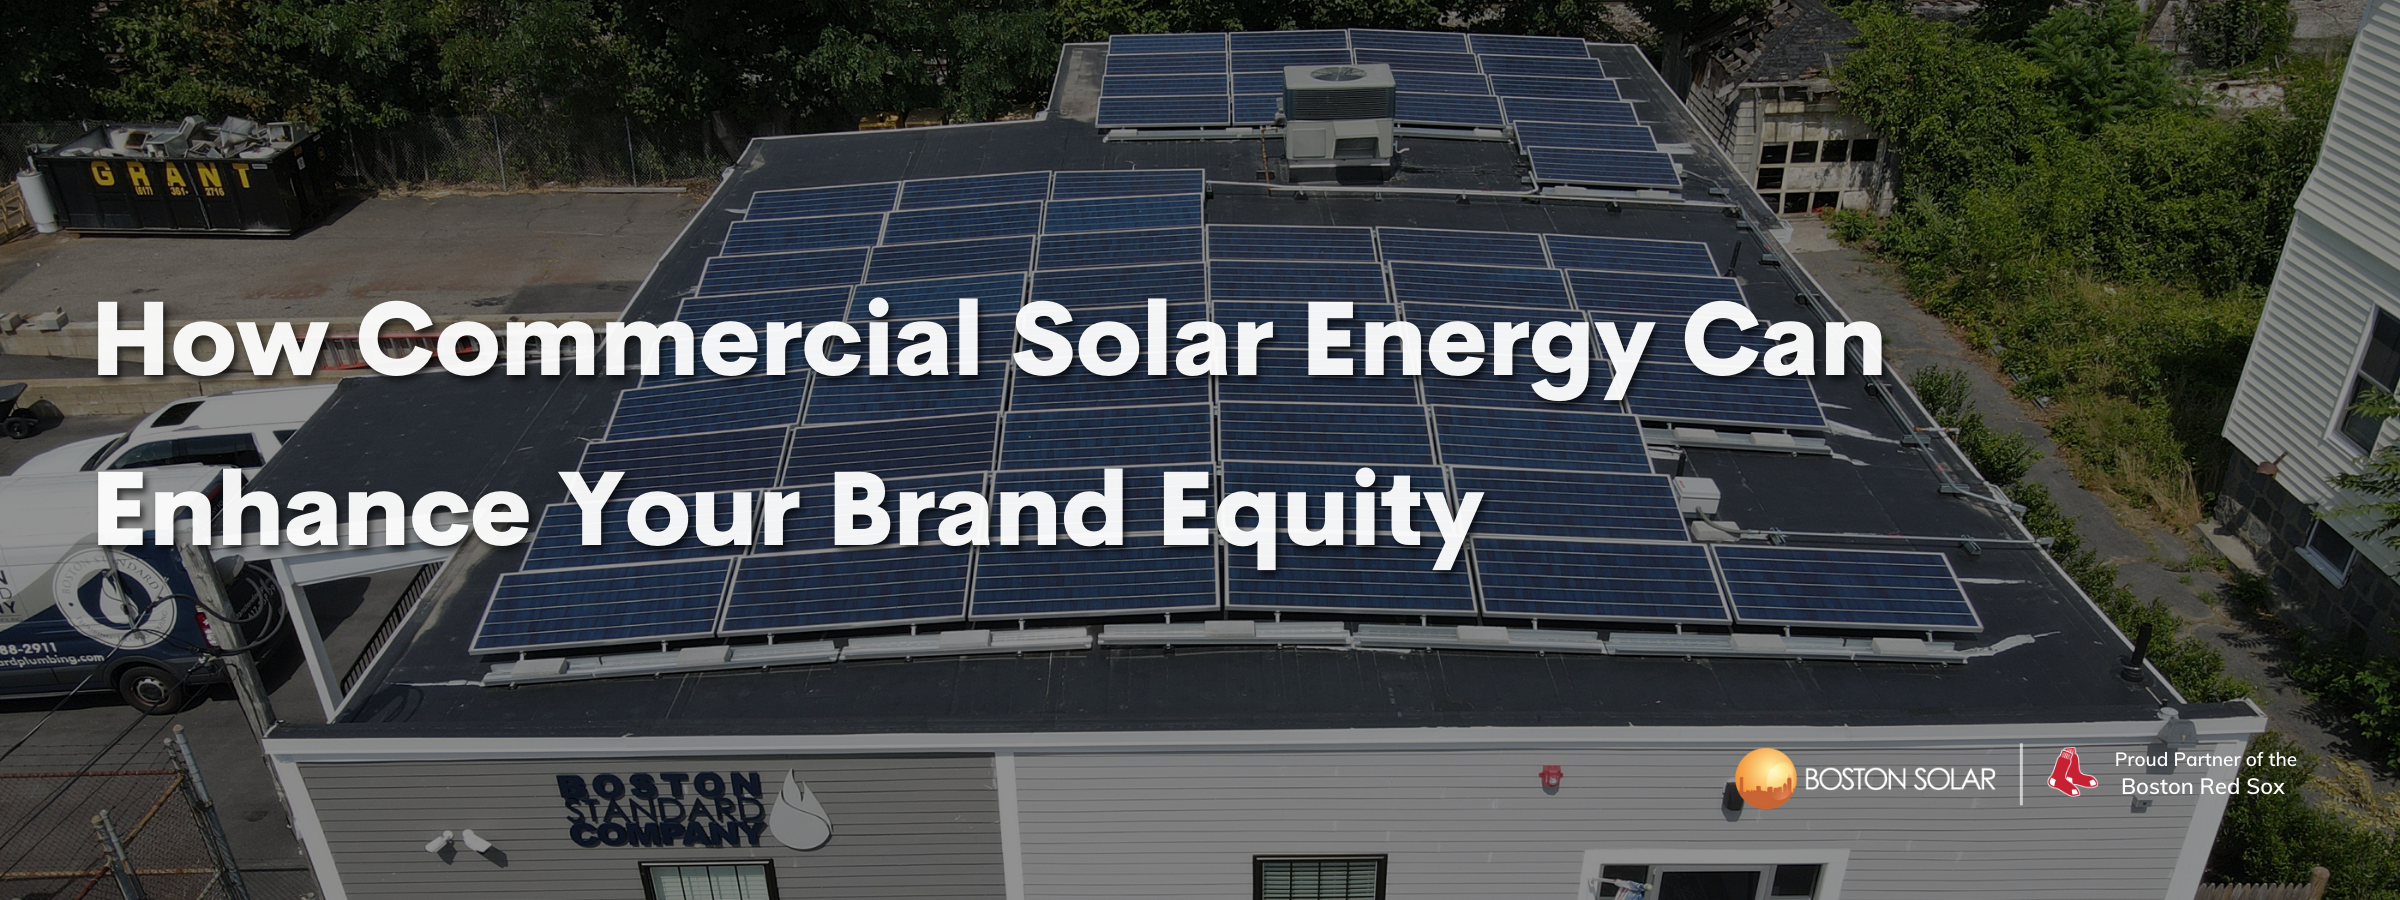 How Commercial Solar Energy Can Enhance Your Brand Equity